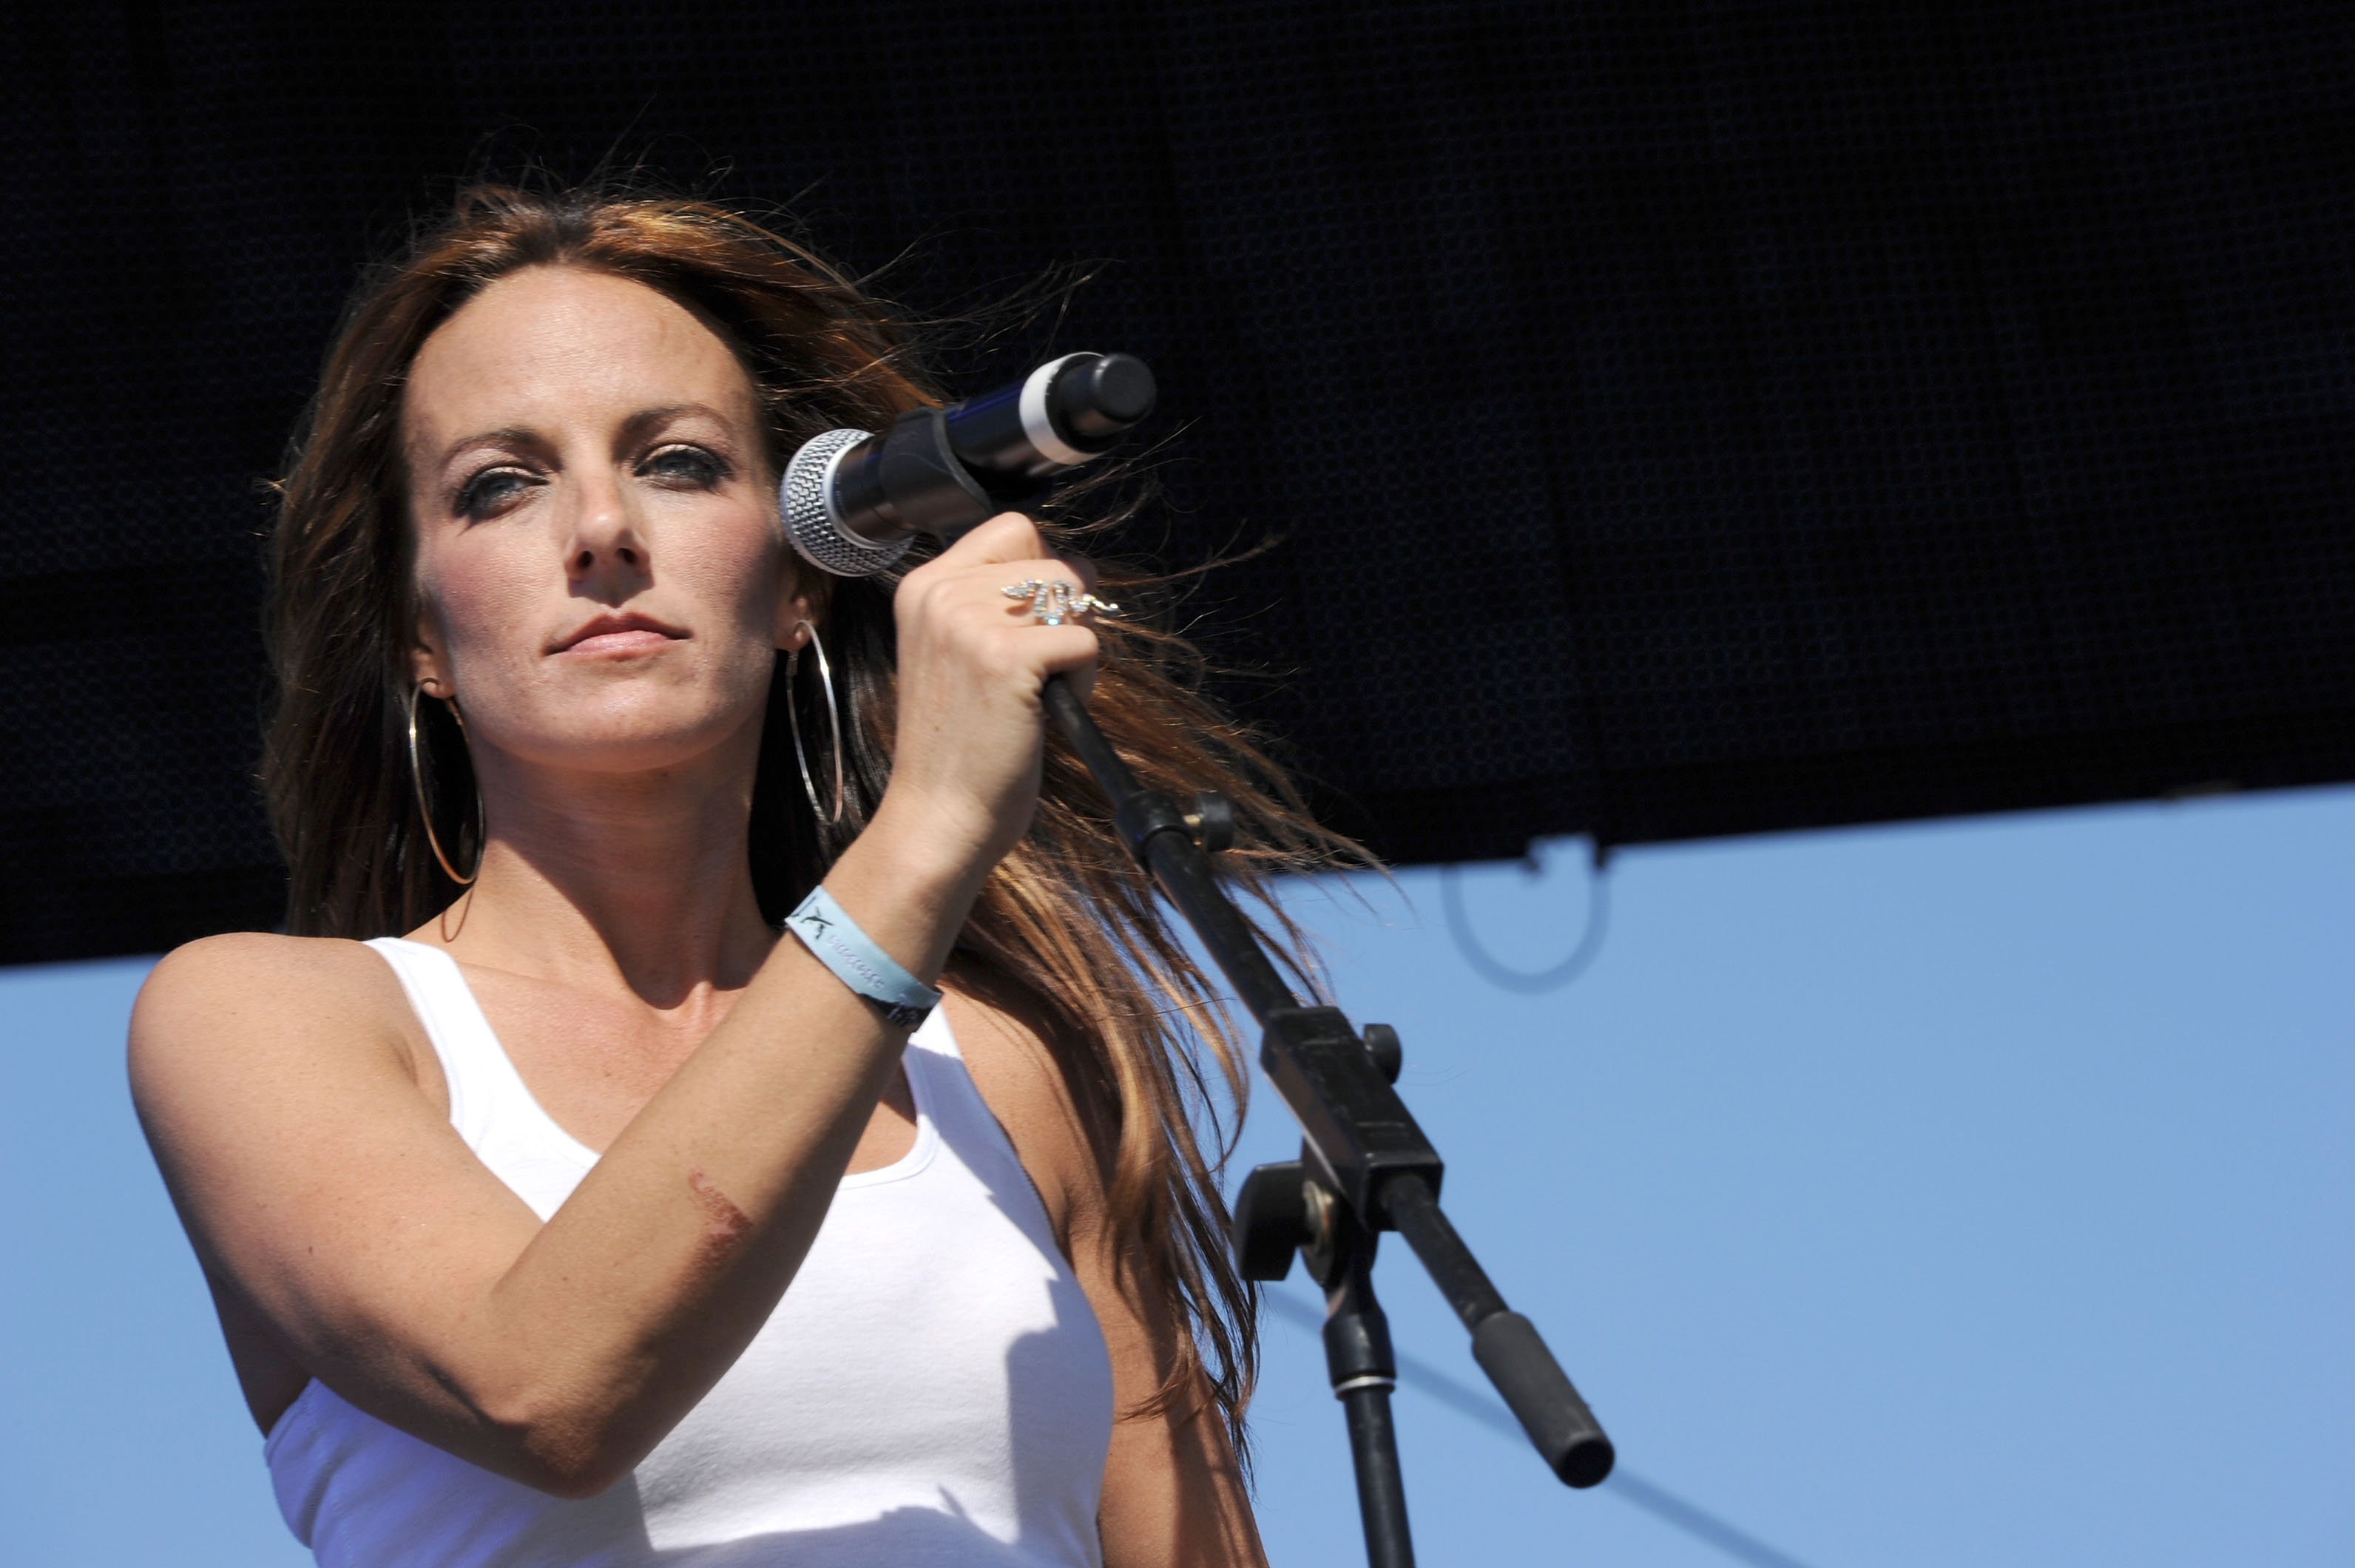 Tayla Lynn of Stealing Angels performs onstage during 2011 Stagecoach: California's Country Music Festival at the Empire Polo Club on April 30, 2011 in Indio, California. | Source: Getty Images